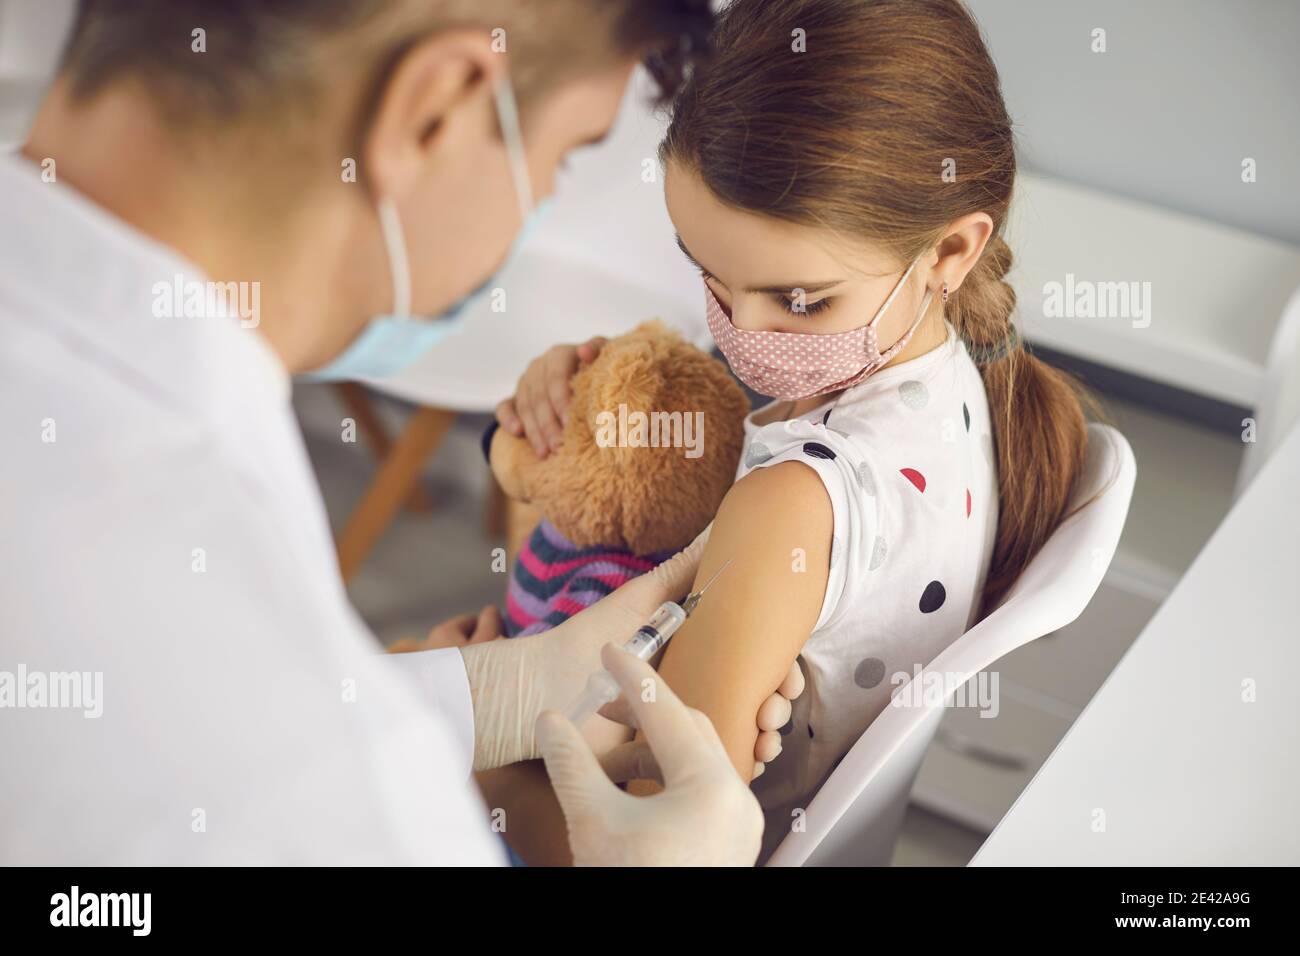 Little girl in protective medical face mask sitting with toy and getting vaccination Stock Photo